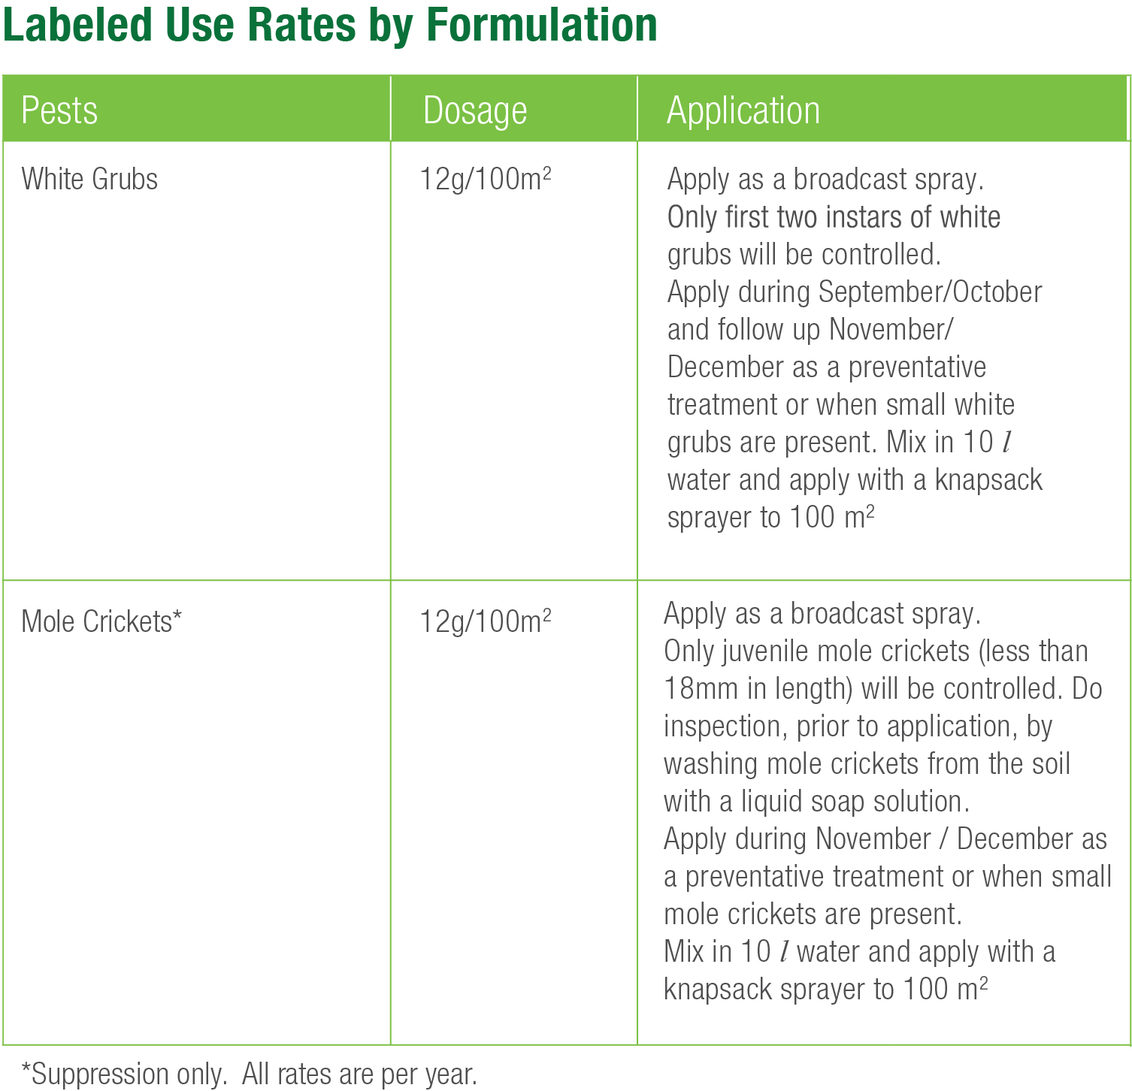 Labelled use rates by formulation